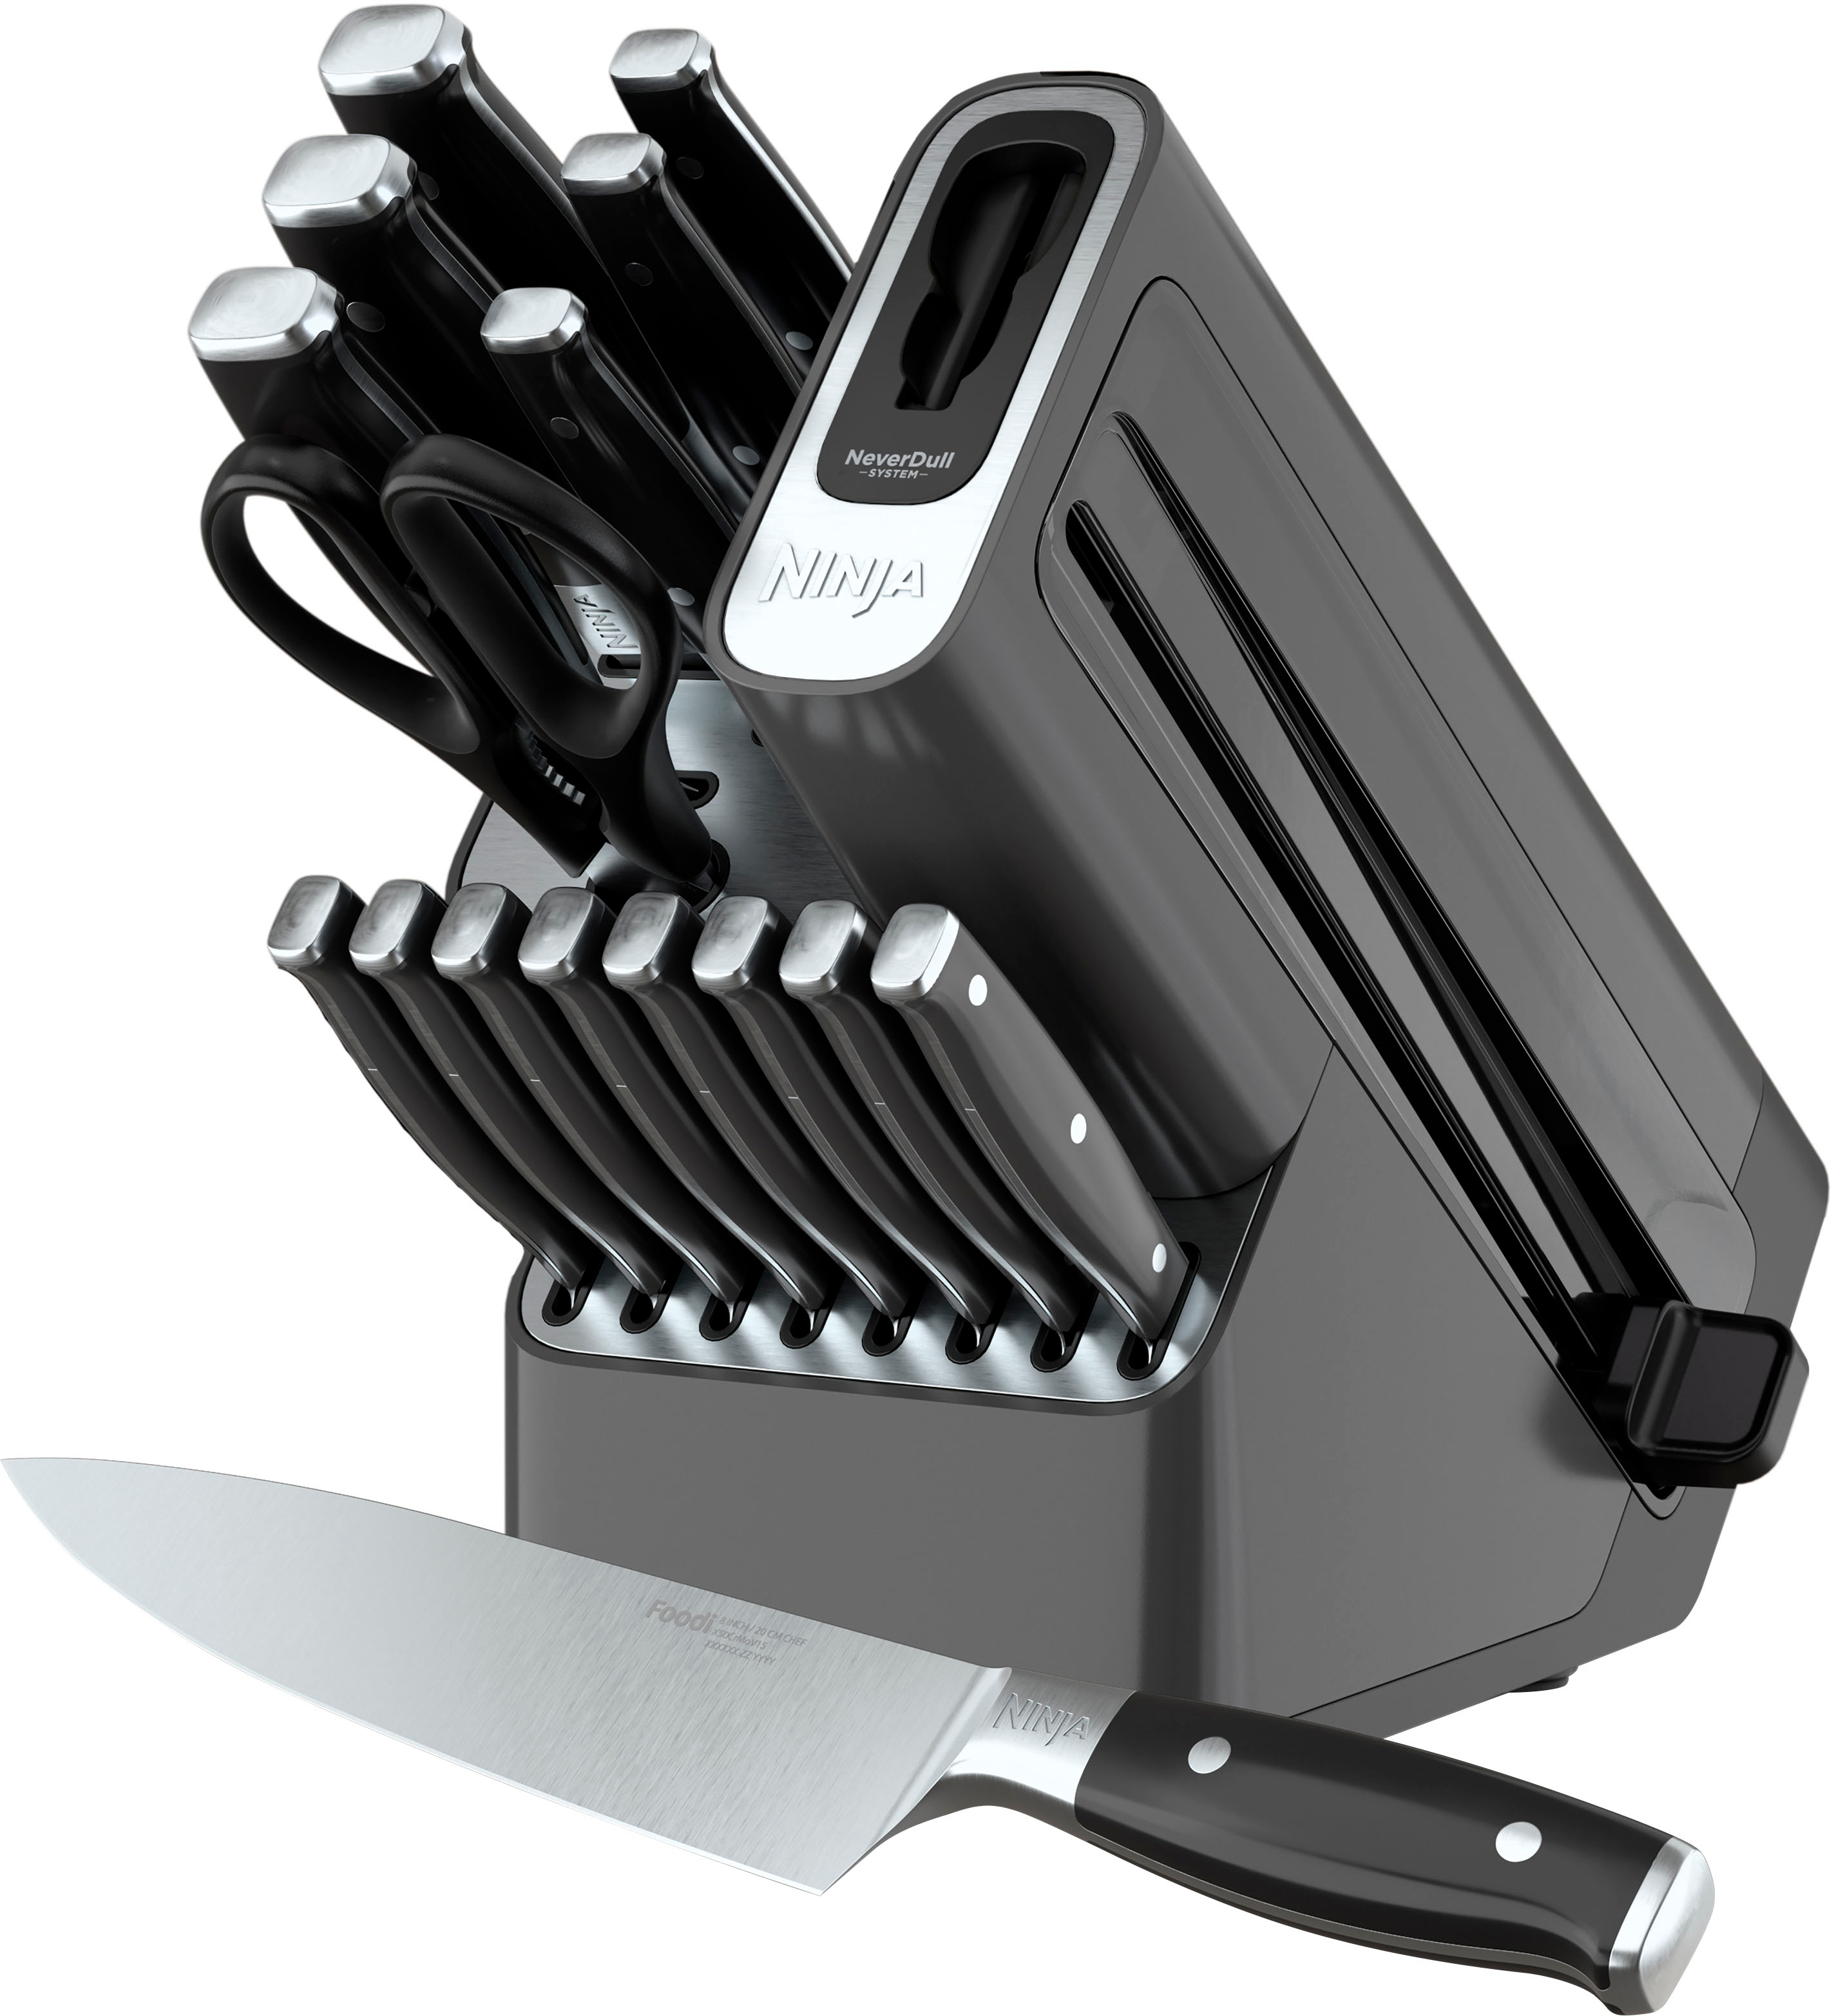 Discover the Ultimate Guide to Finding Year-Round Kitchen Knife Sales - Slash Prices Anytime!